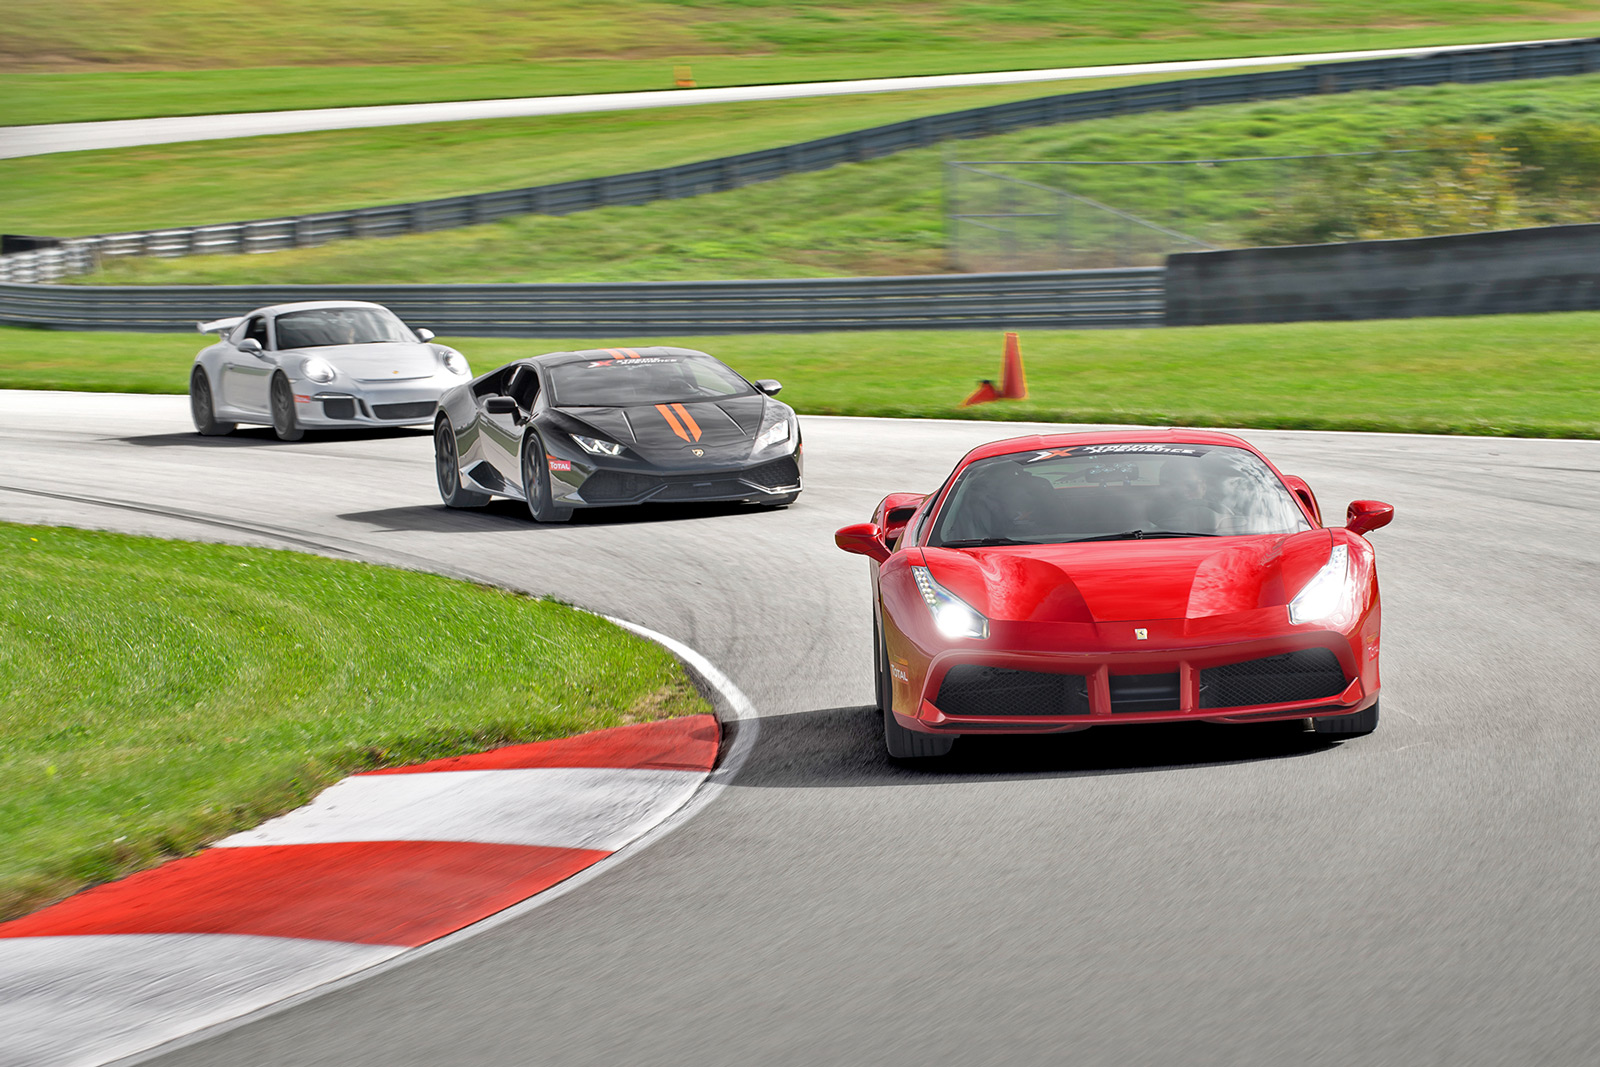 Luxury Cars on Racetrack - Ditch The Merch Reward With Memorable Experiences